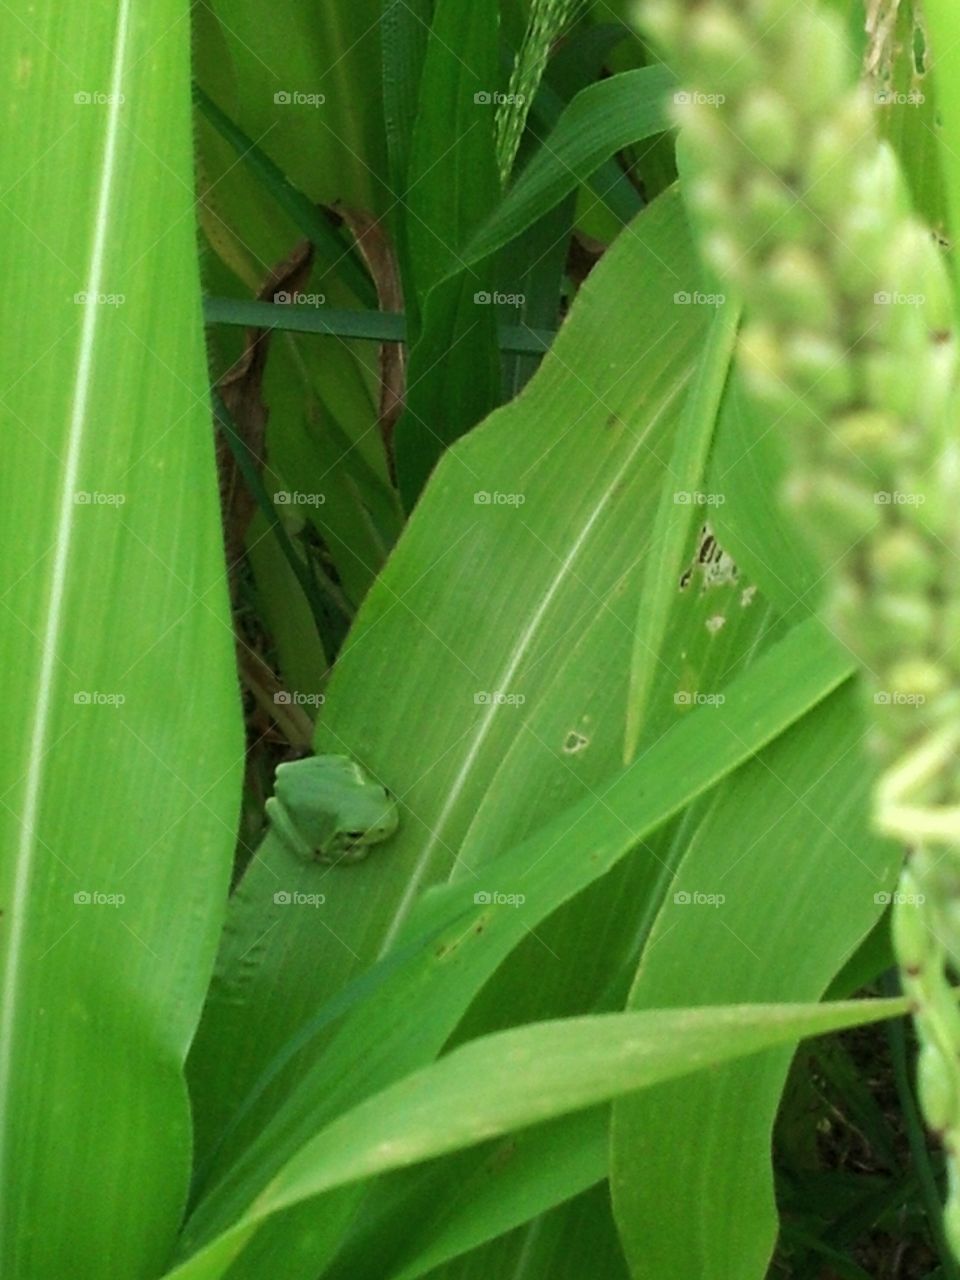 Frog in the Corn